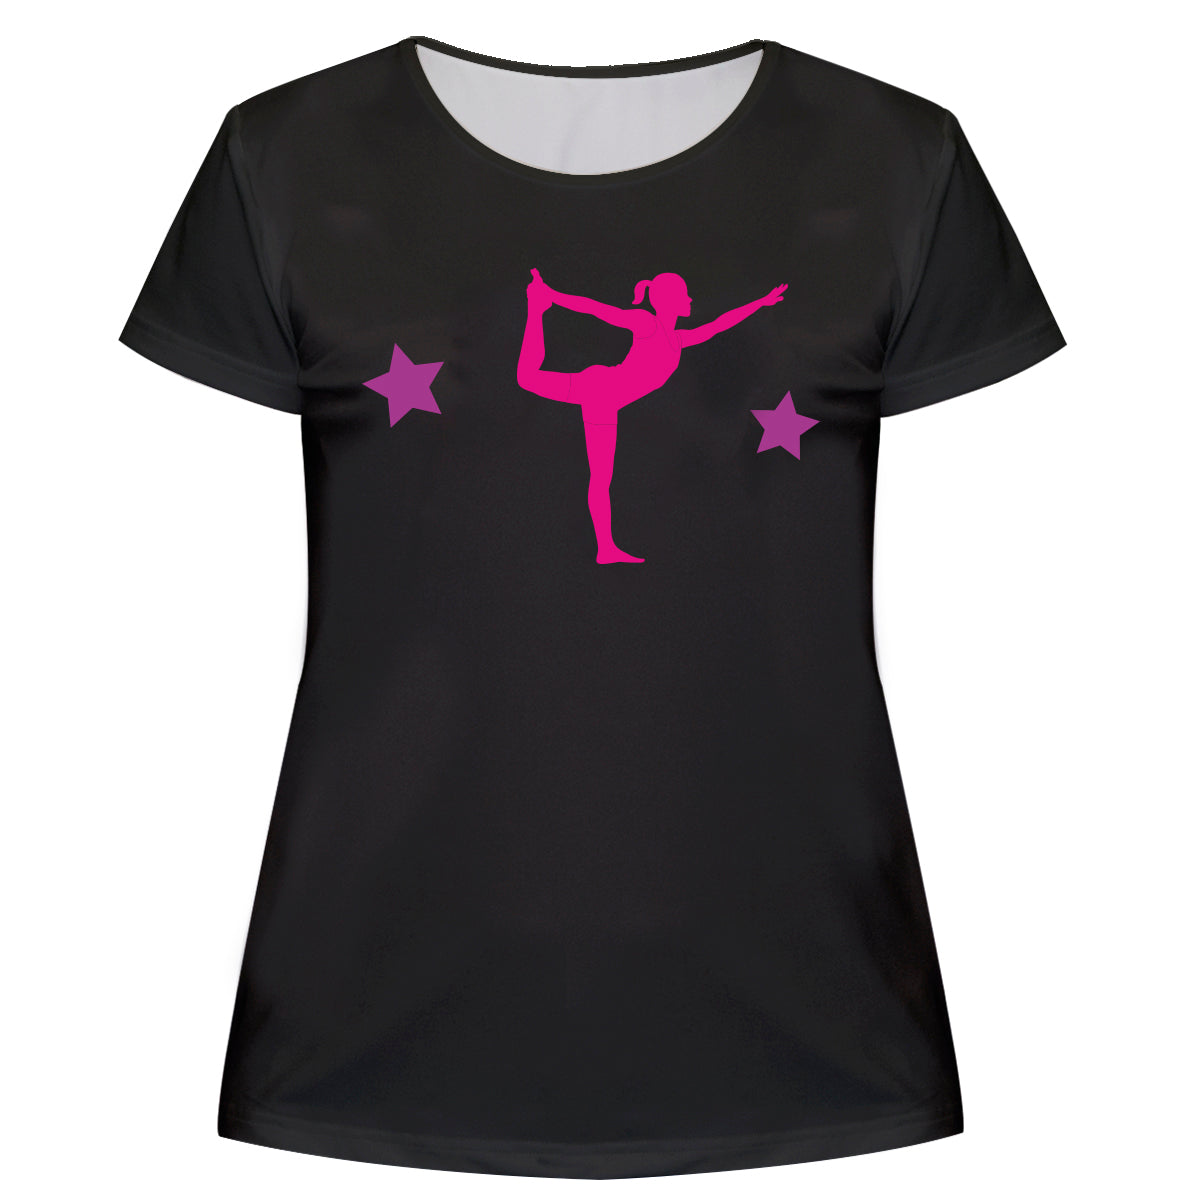 Black and pink gymnast silhouette girls blouse with name - Wimziy&Co.